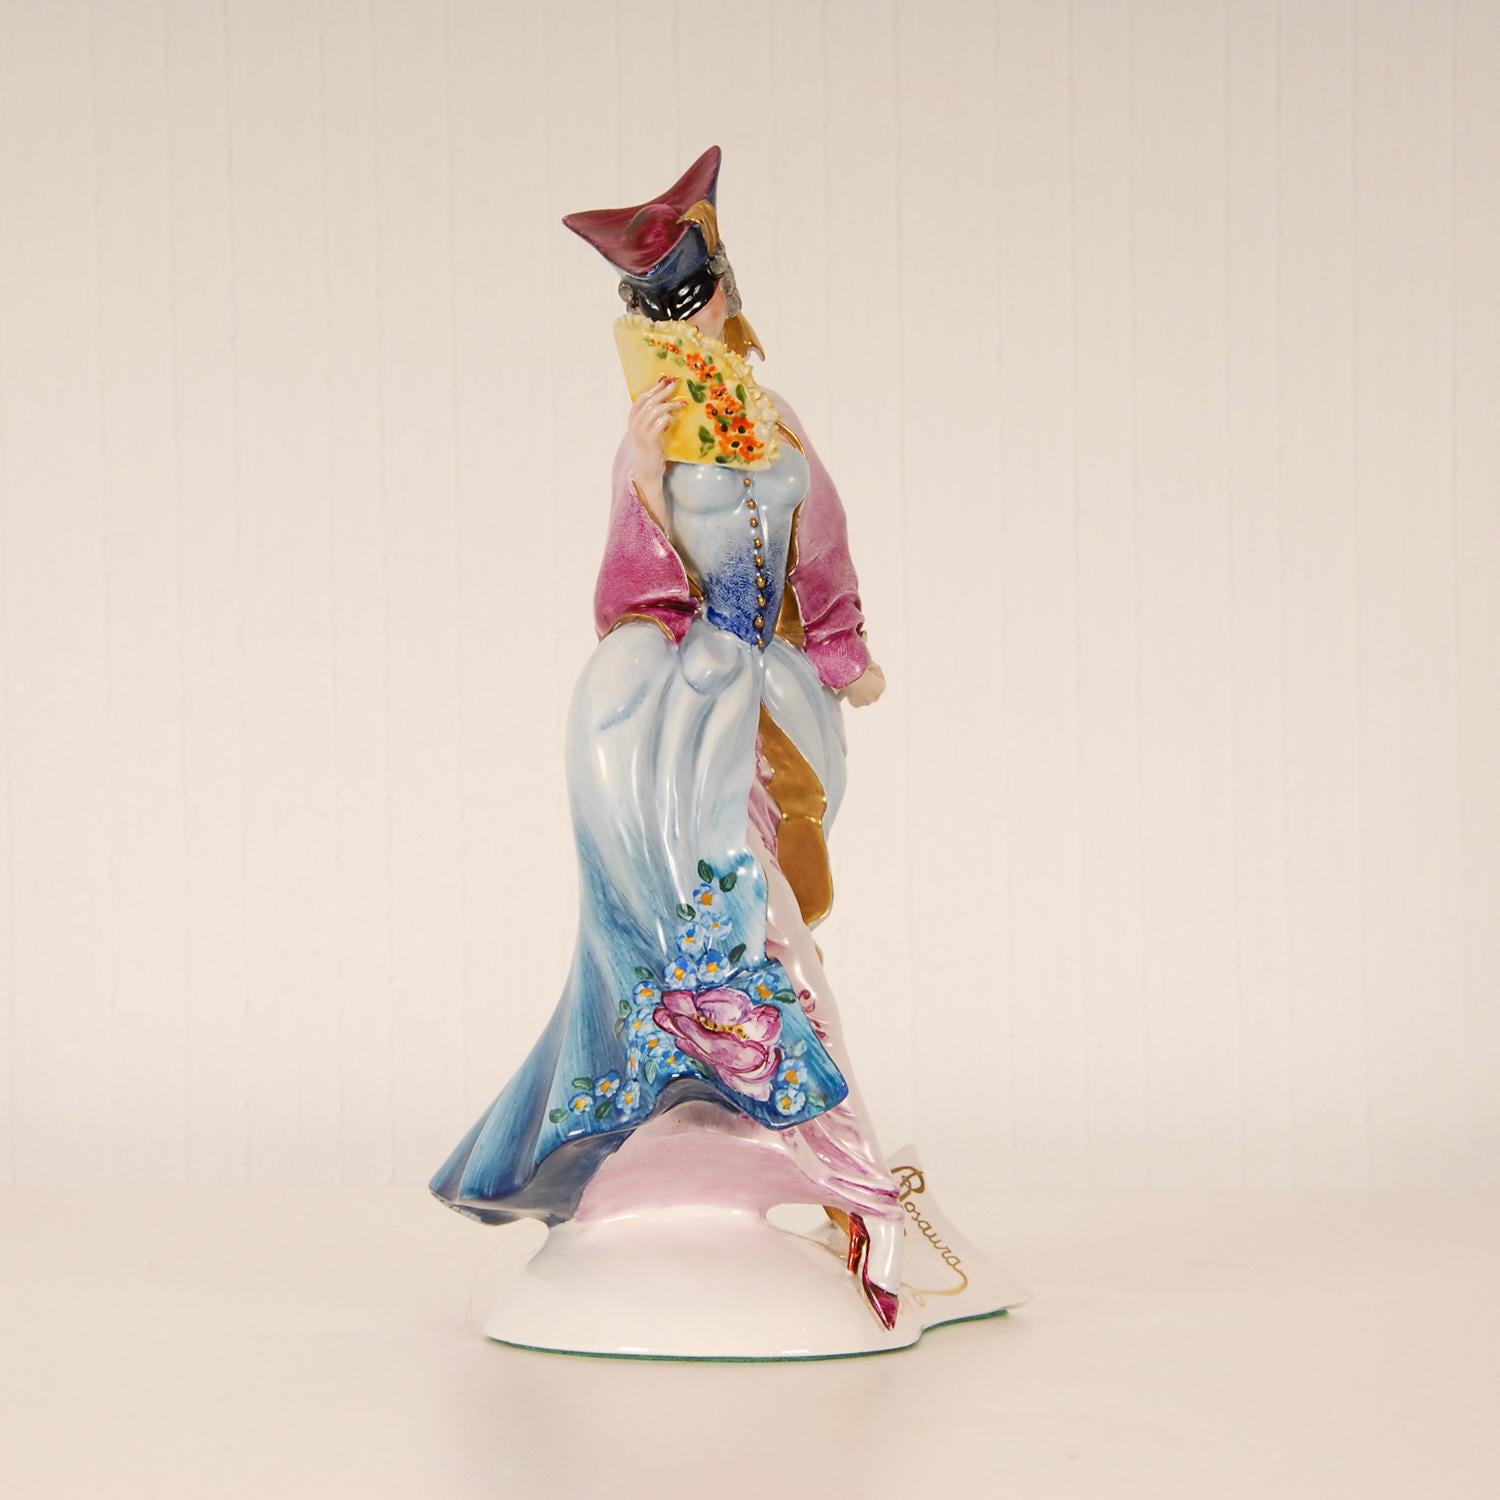 Italian Art deco porcelain figurine
Depicting a Commedia Dell'arte figure Venice Carnaval, with a mask
Hand-crafted figurine her pink dress is heighten with gold and embellished with hand painted flowers 
in bright colours, In her hand a fan
Style